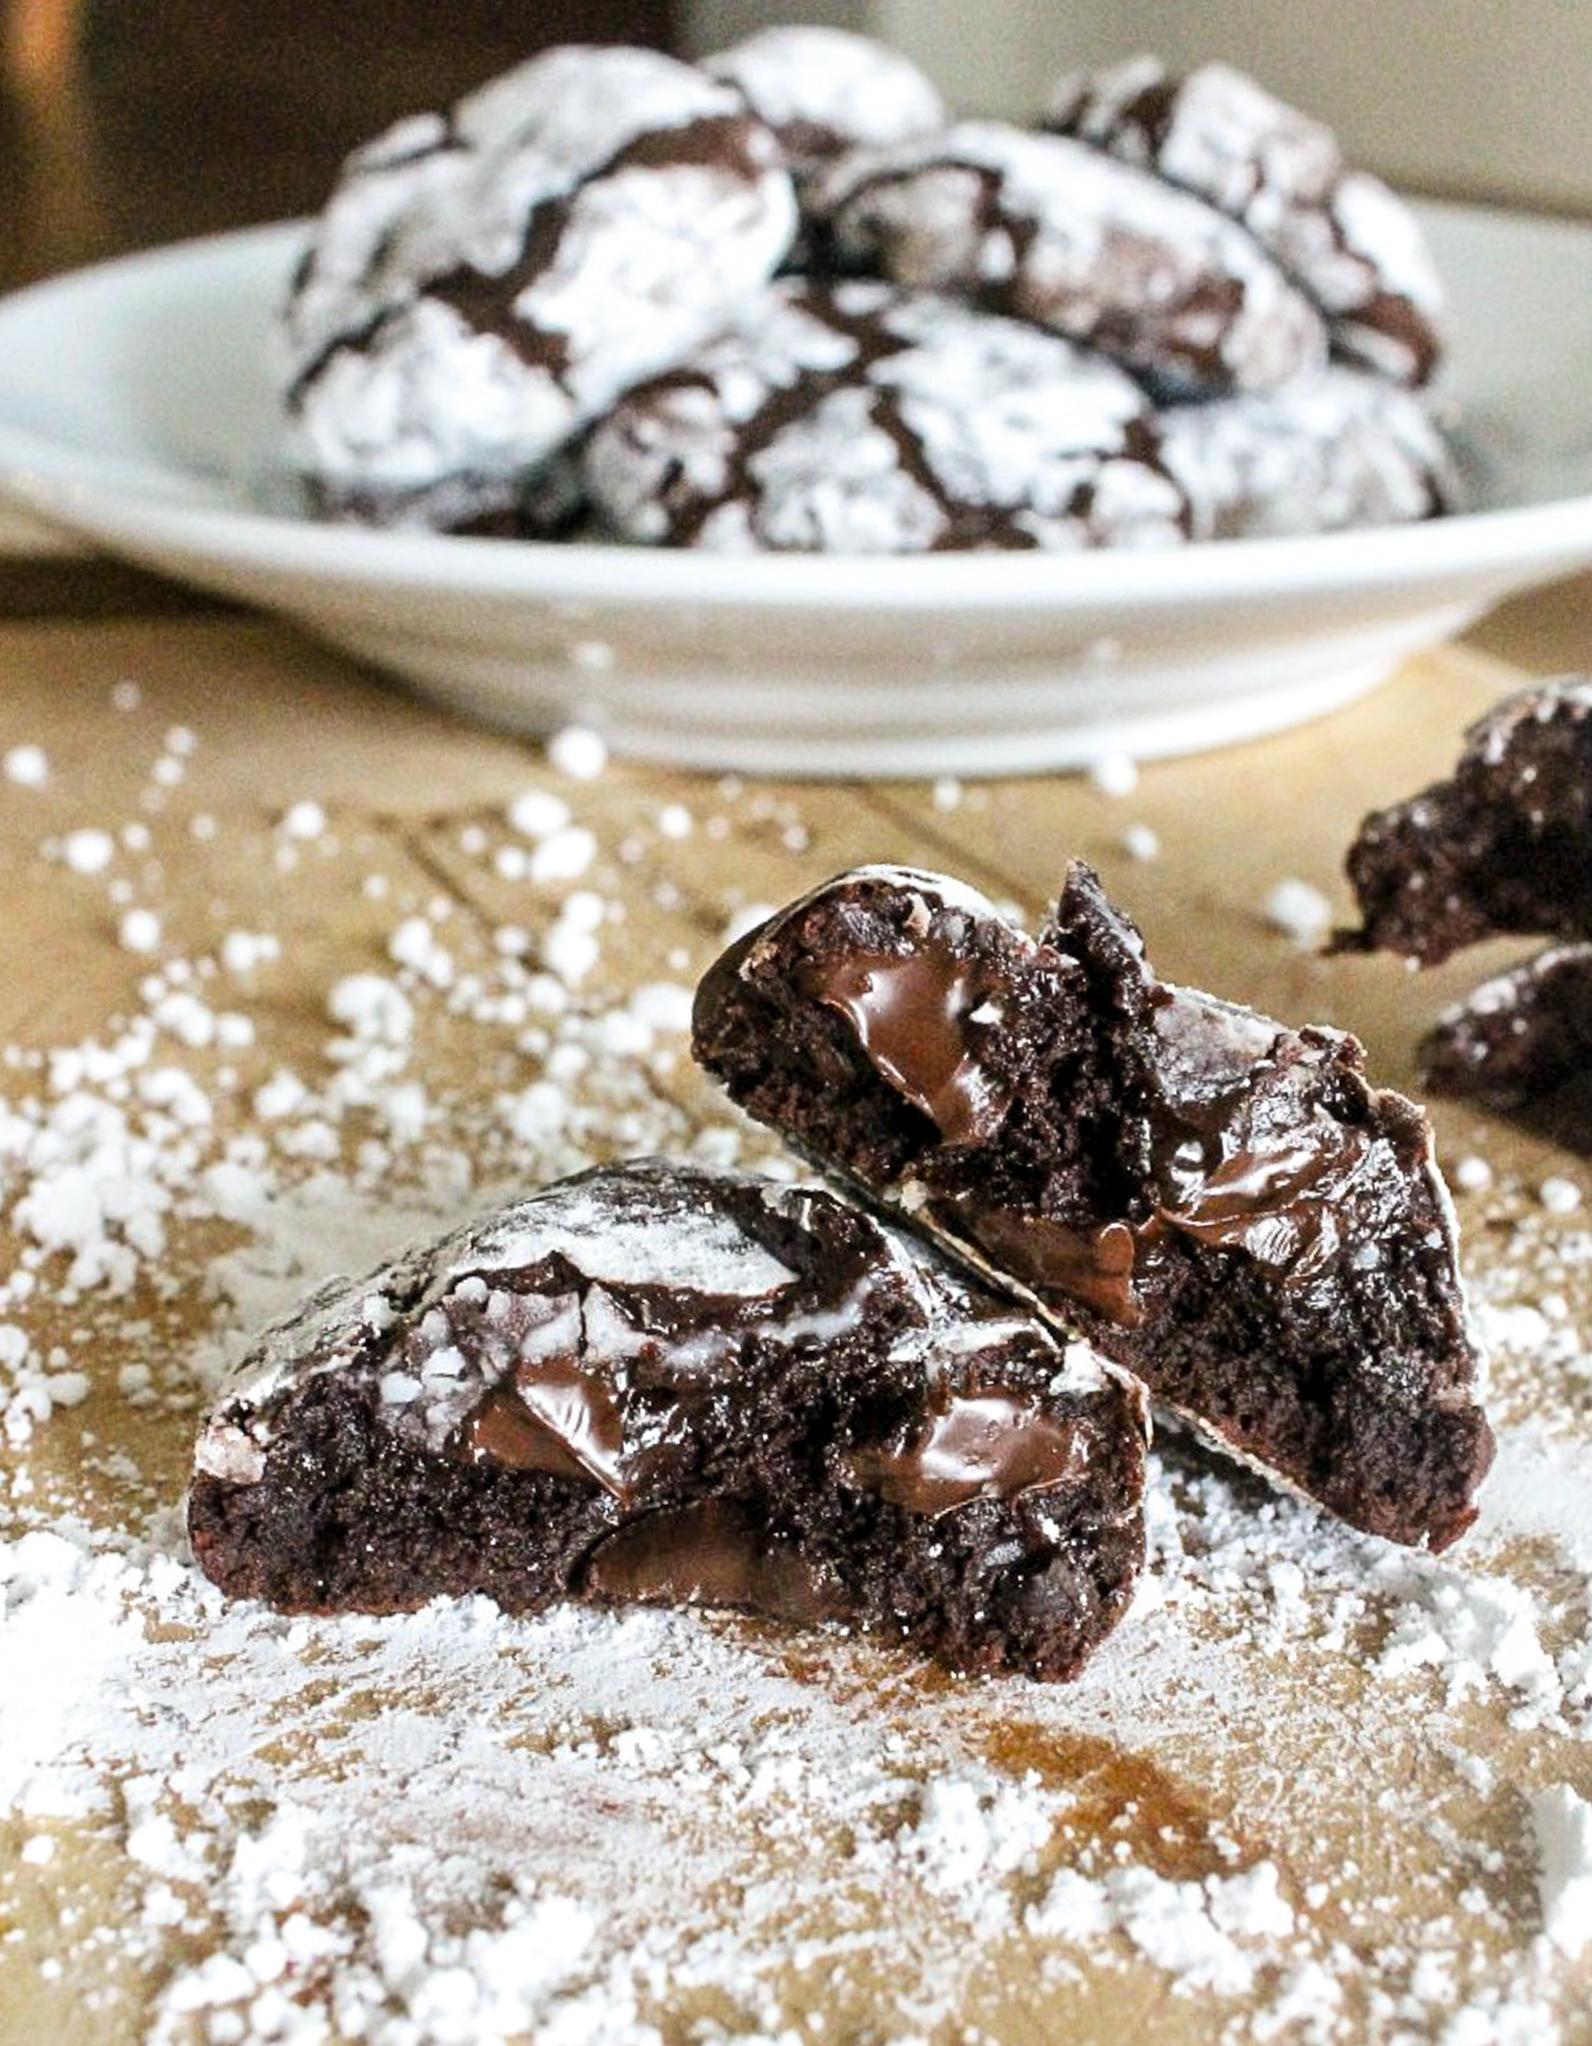  Chocolate crinkle cookies are always a crowd-pleaser, but these gluten-free ones take it to the next level.